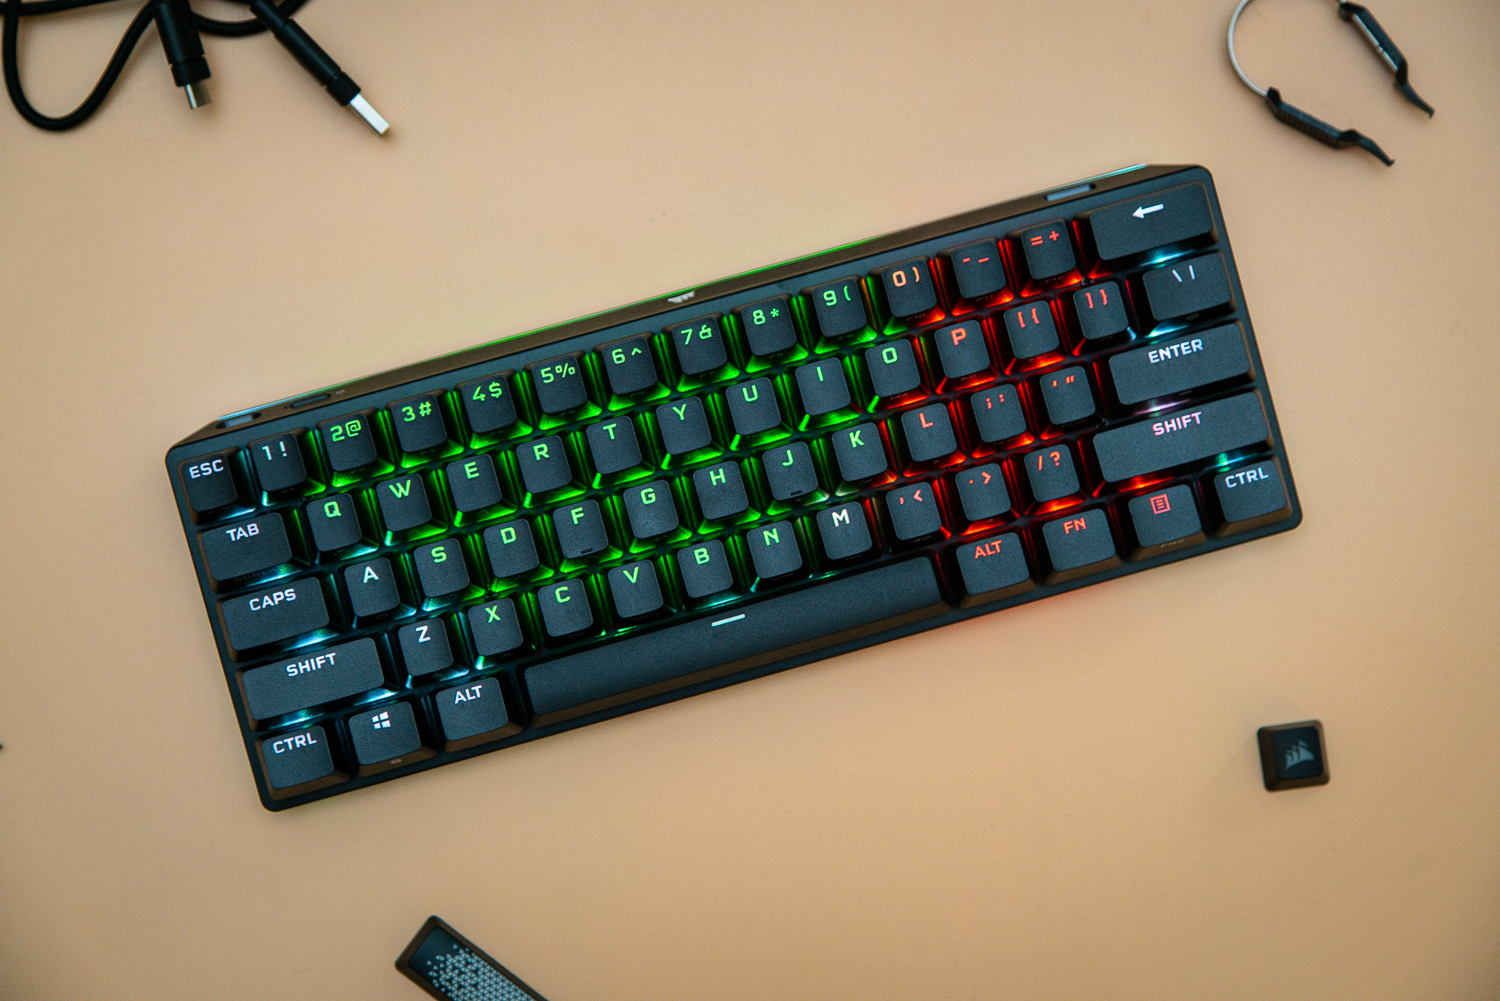 Corsair K70 Pro Mini review: A new bar for gaming keyboards